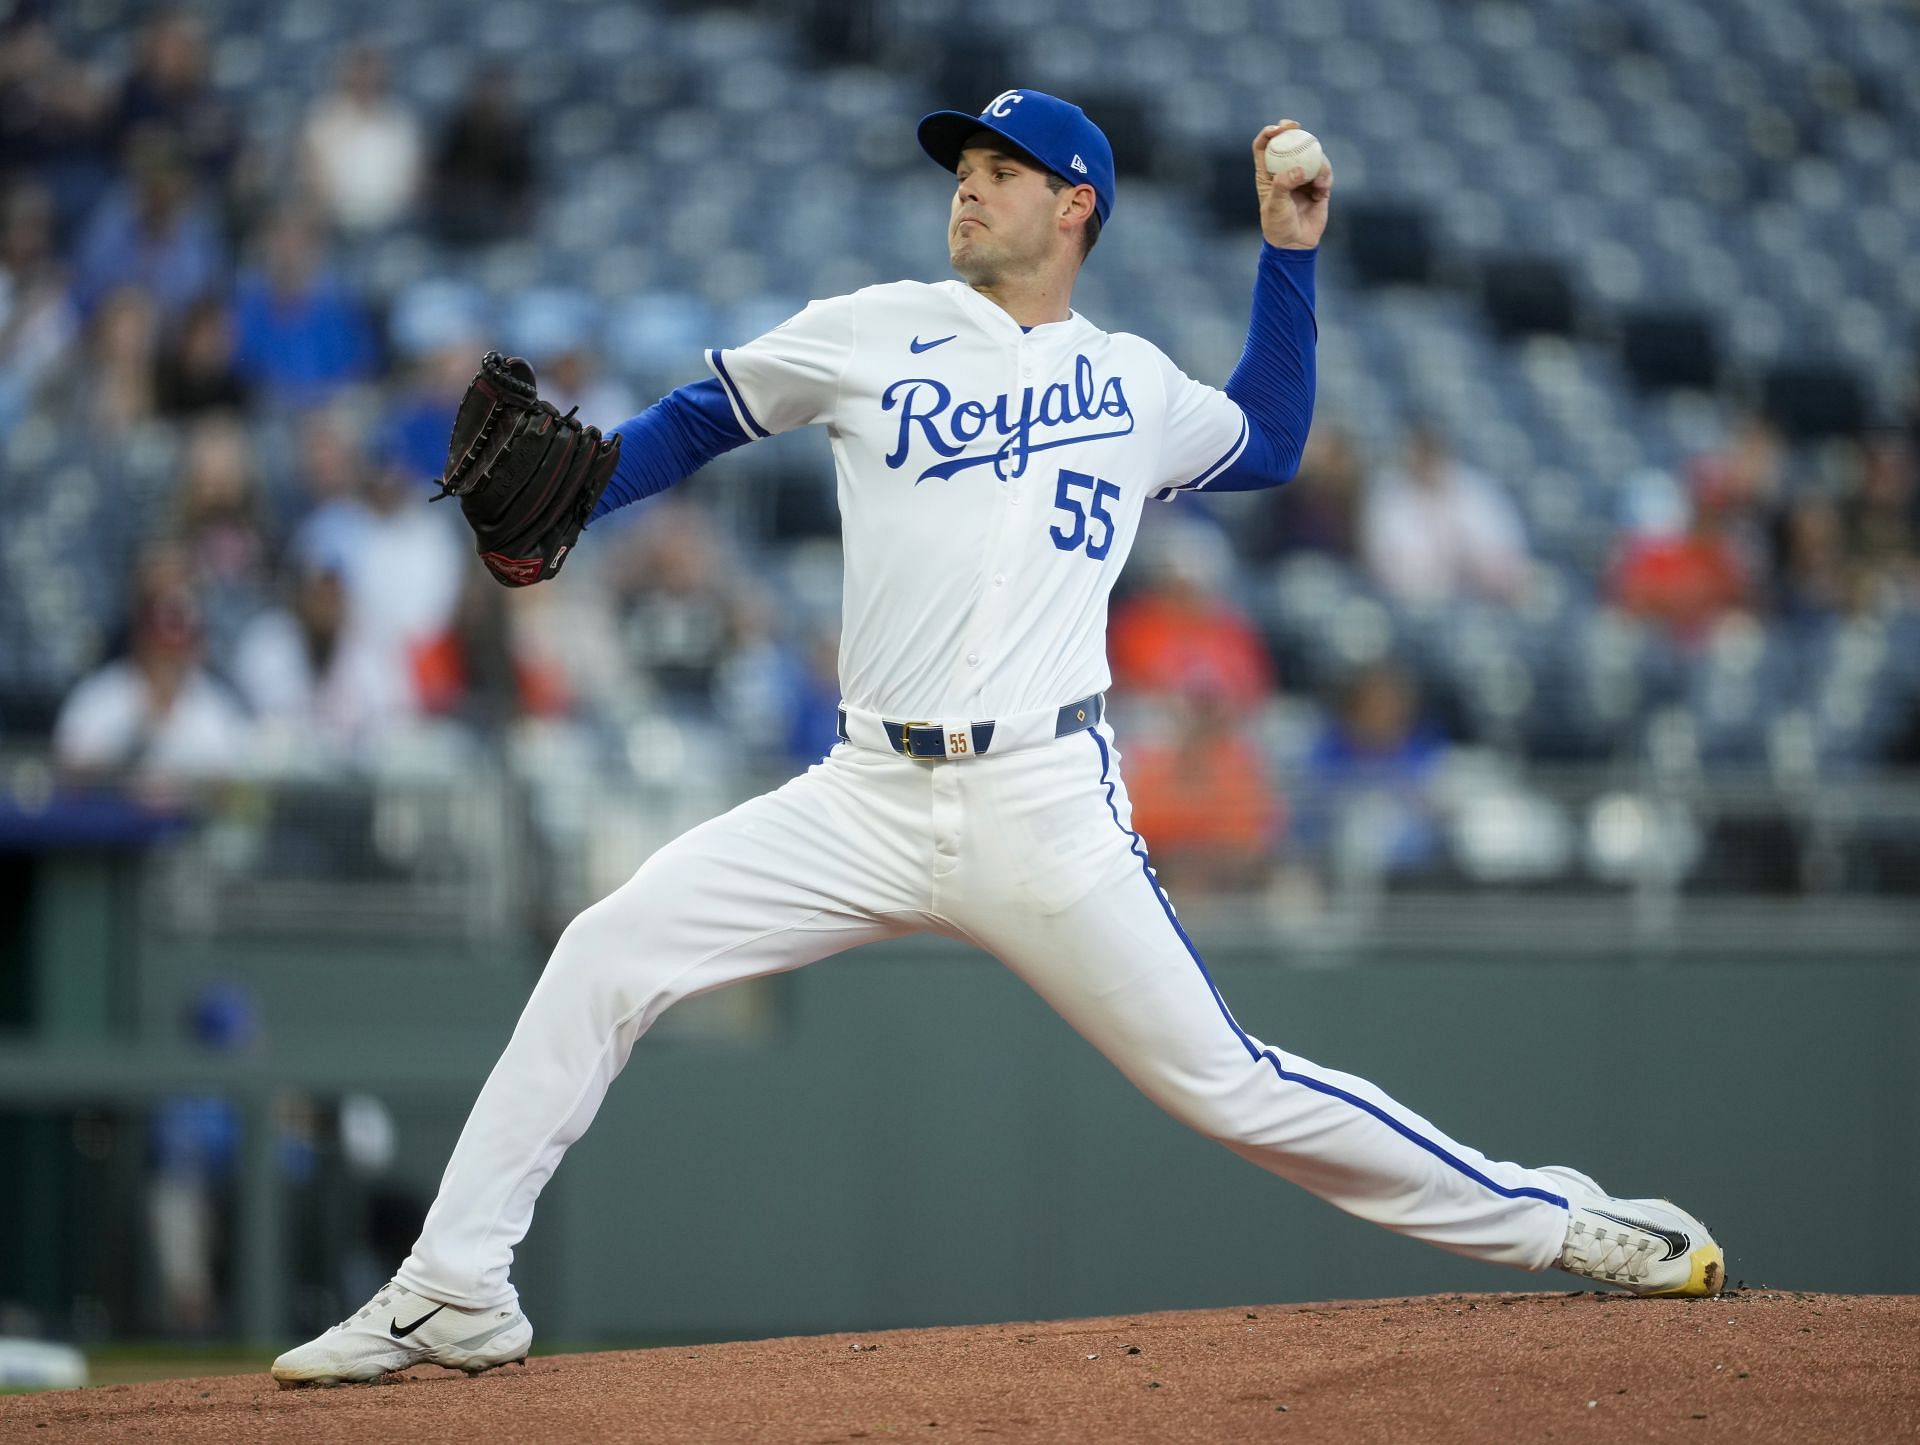 Cole Ragans has been an ace in Kansas City